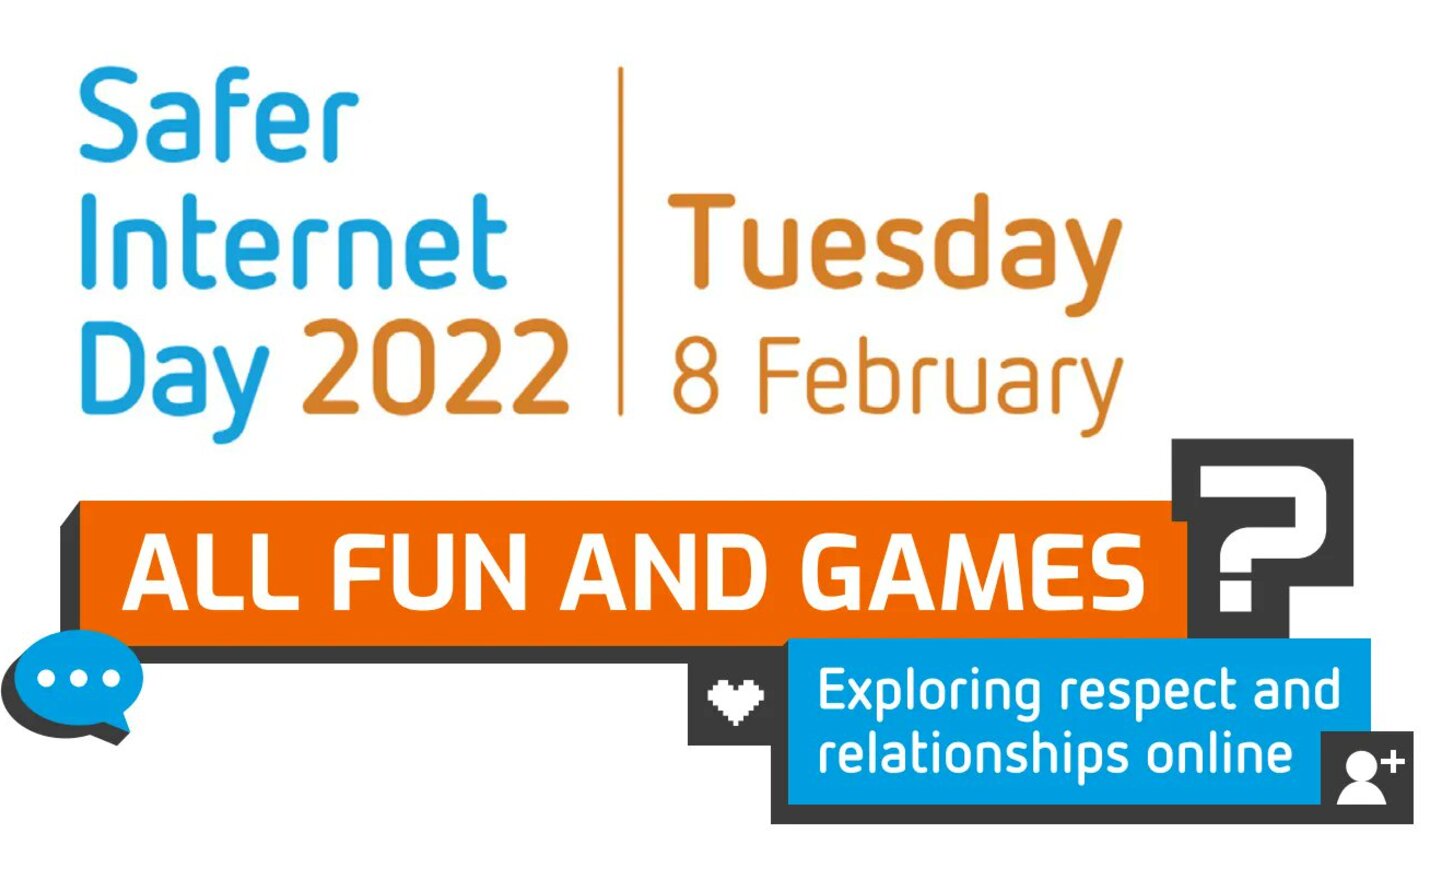 Image of Safer Internet Day 2022 in Year 2